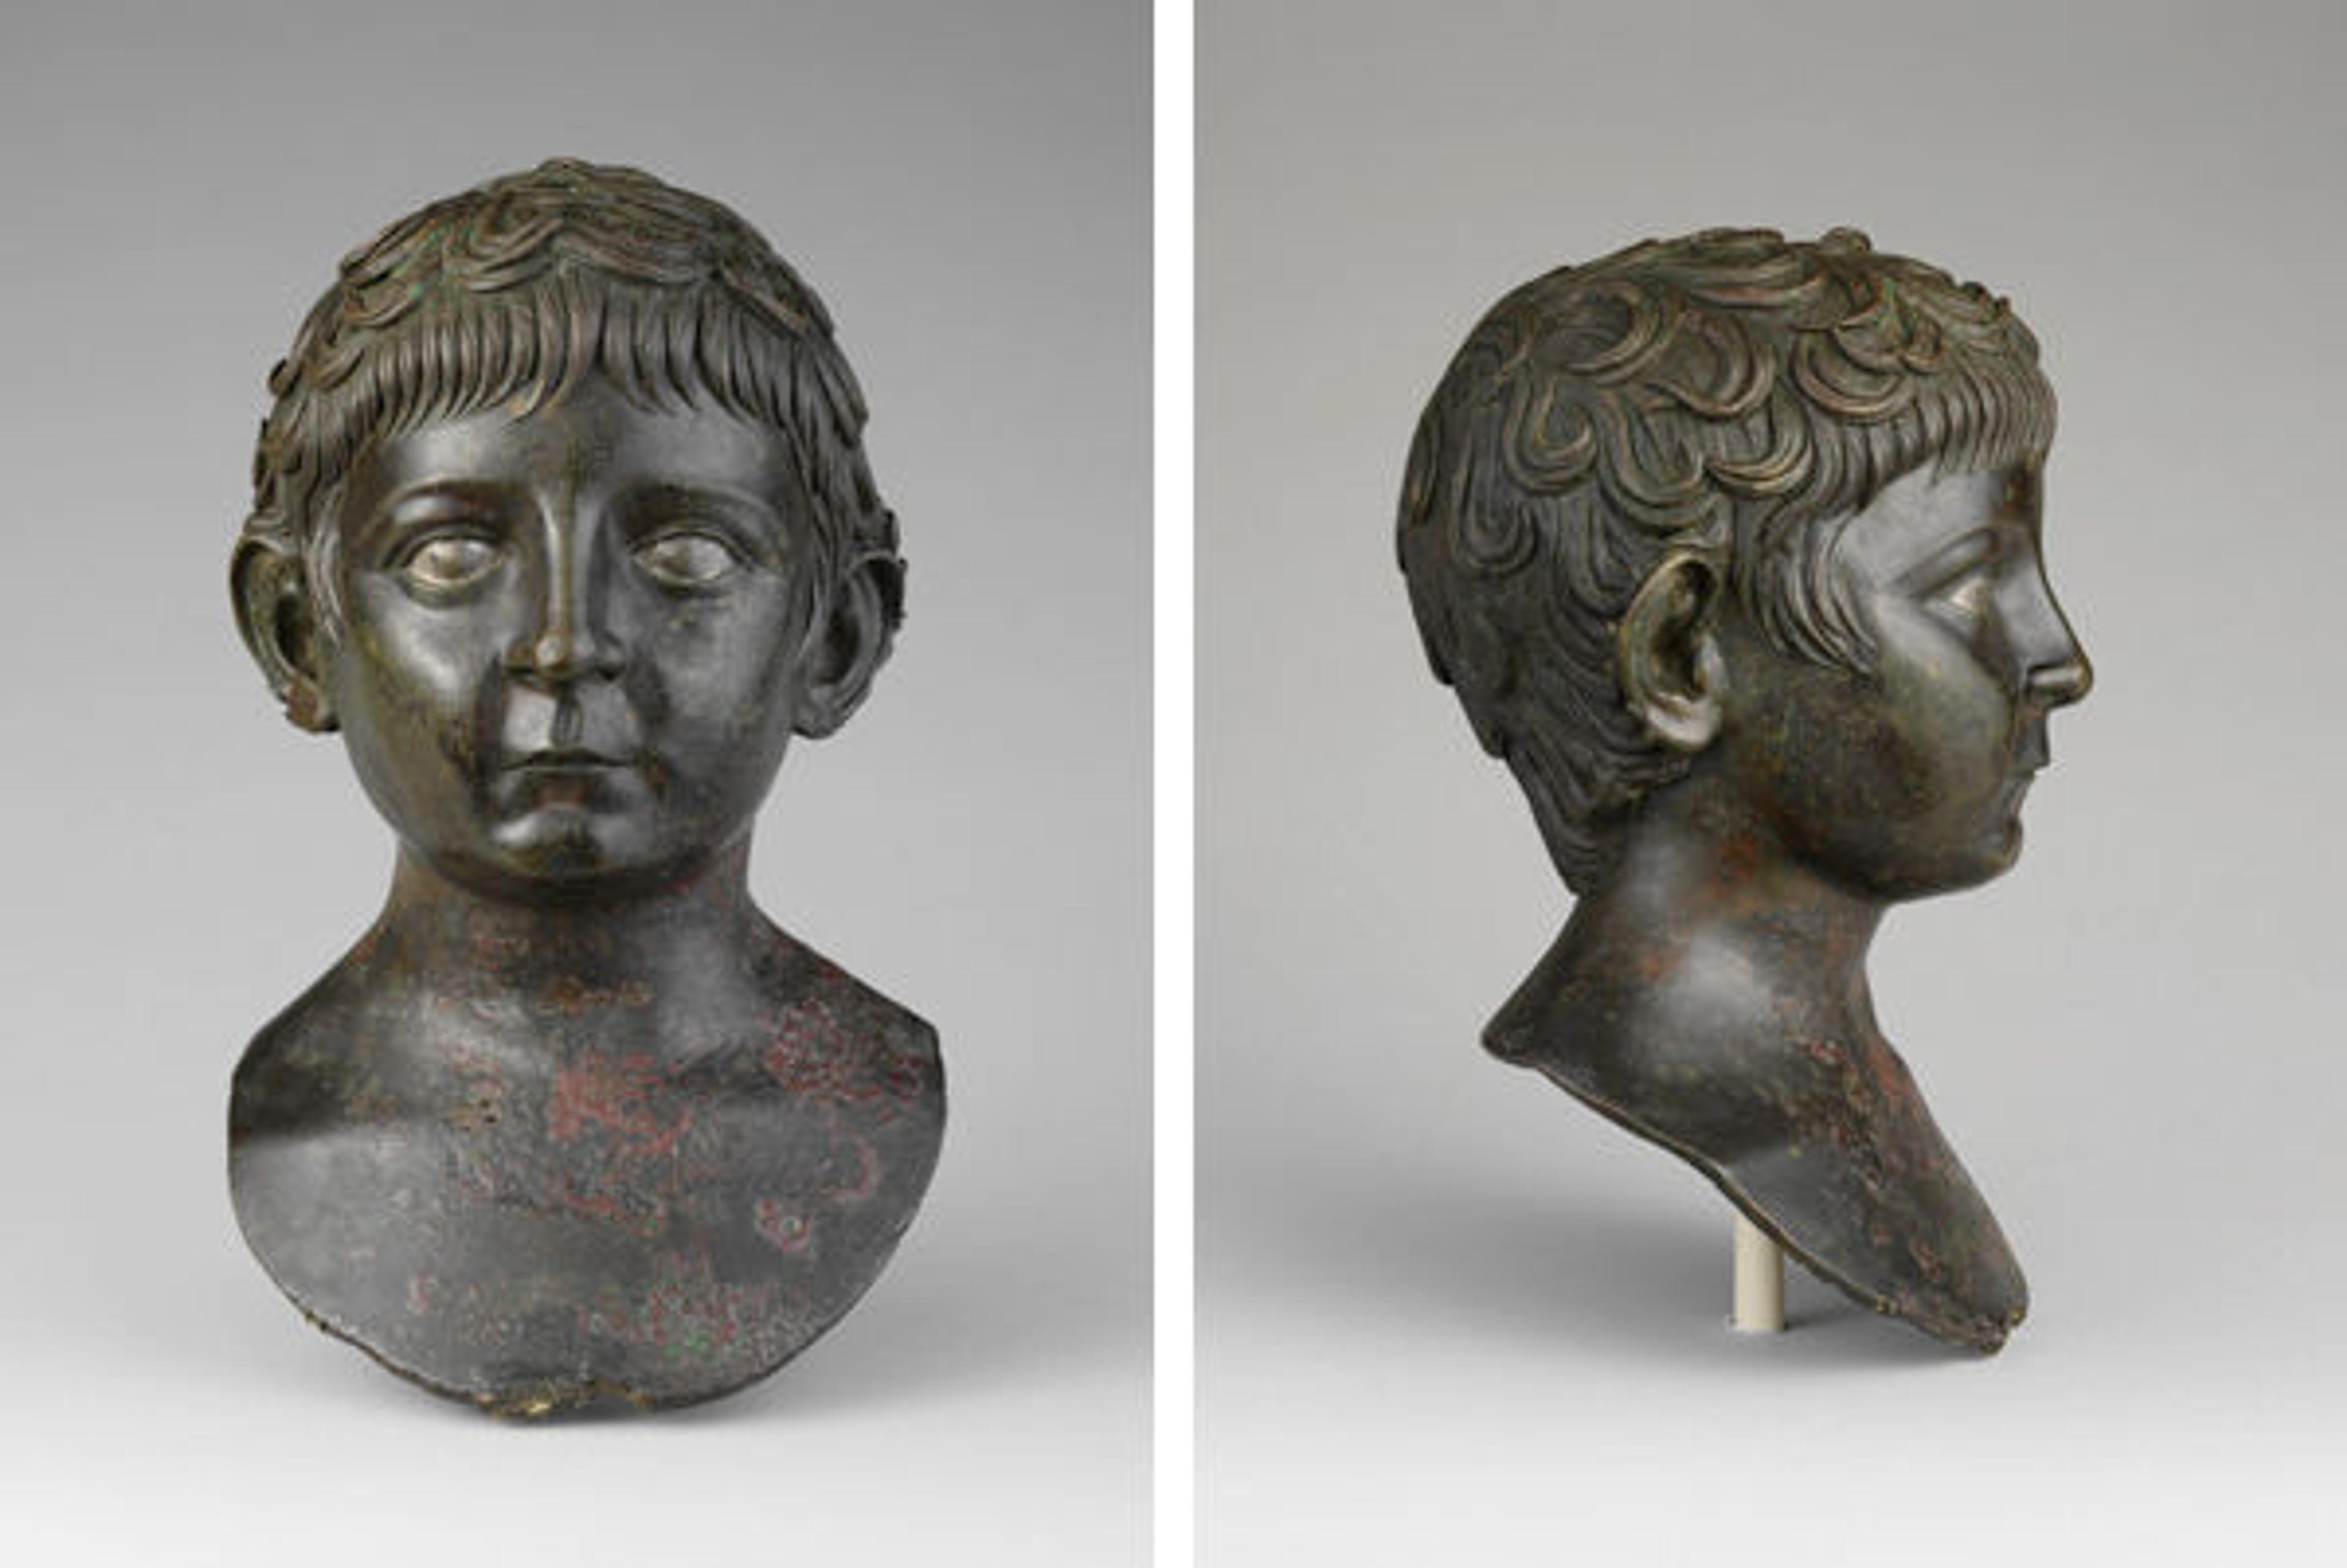 Bronze portrait bust of a young boy, ca. A.D. 50–68. Roman, early Imperial, Julio-Claudian. Bronze, silver; H. 11 1/2 in. (29.2 cm). The Metropolitan Museum of Art, New York, Funds from various donors, 1966 (66.11.5)